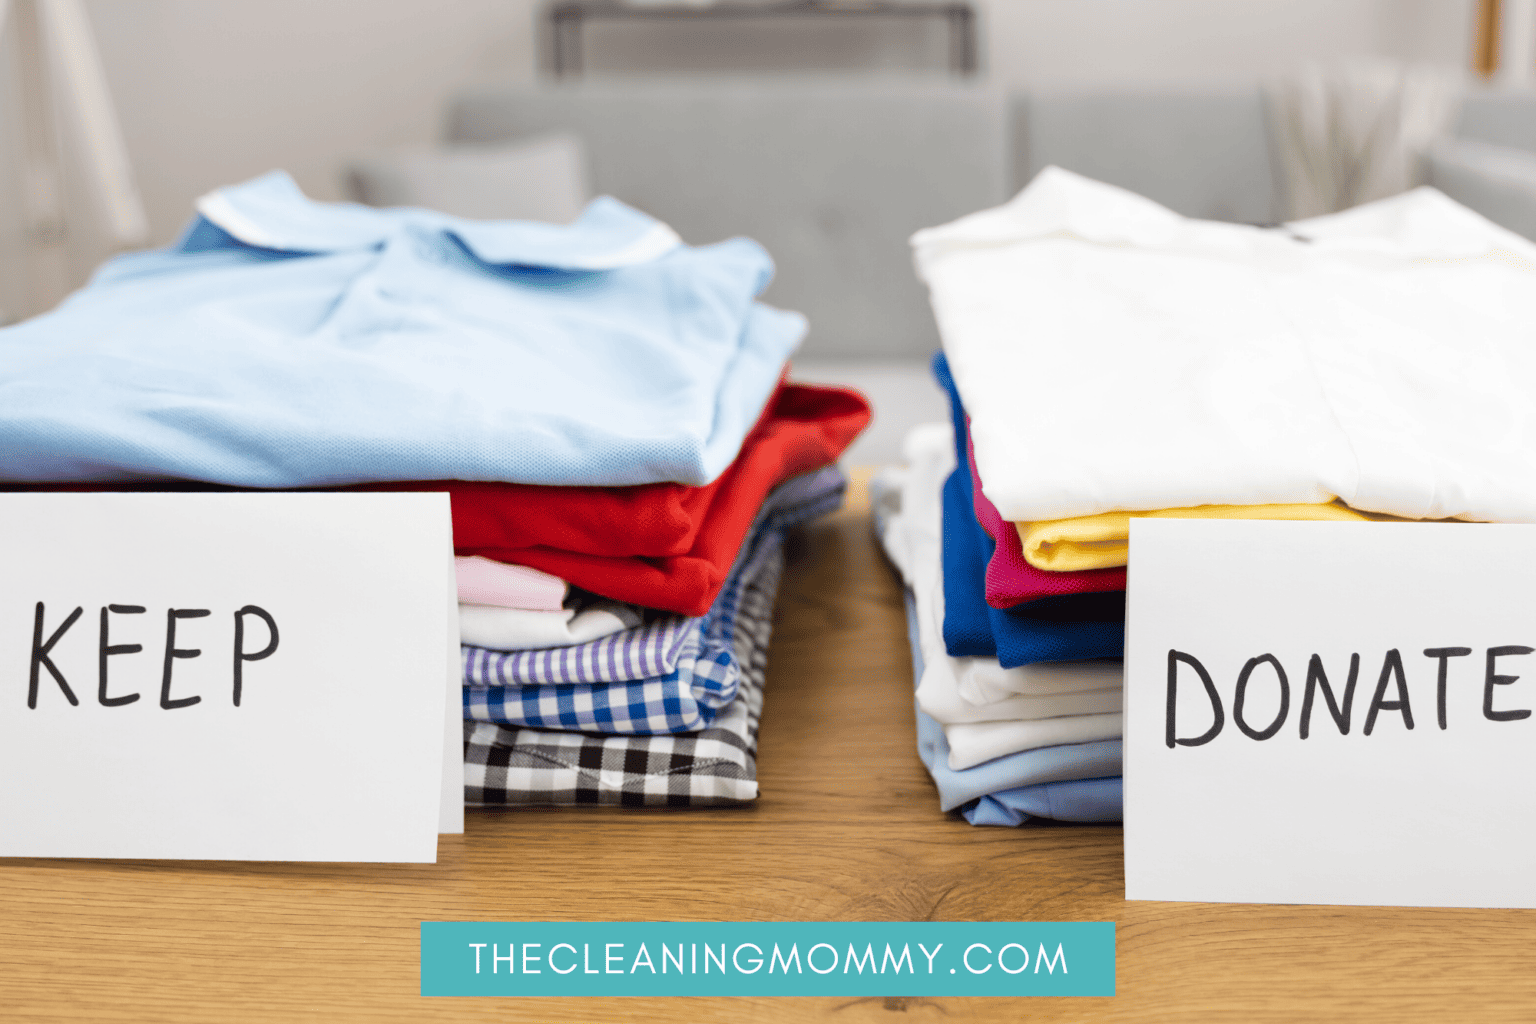 25+ Life Changing Decluttering Tips for Hoarders - The Cleaning Mommy